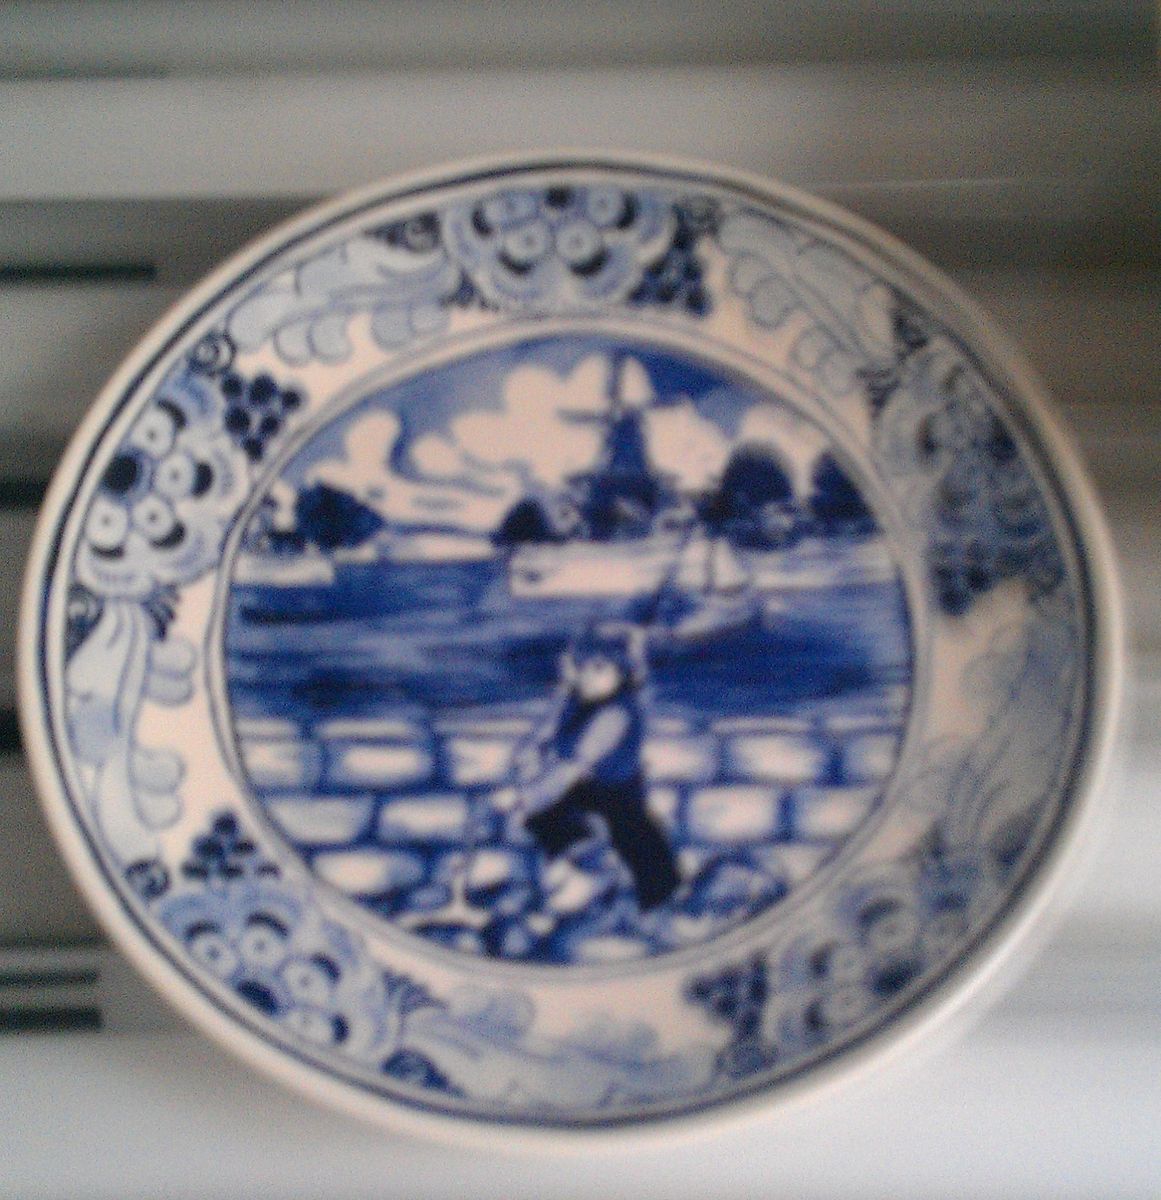 The Hans Brinker Delft Plate Collection